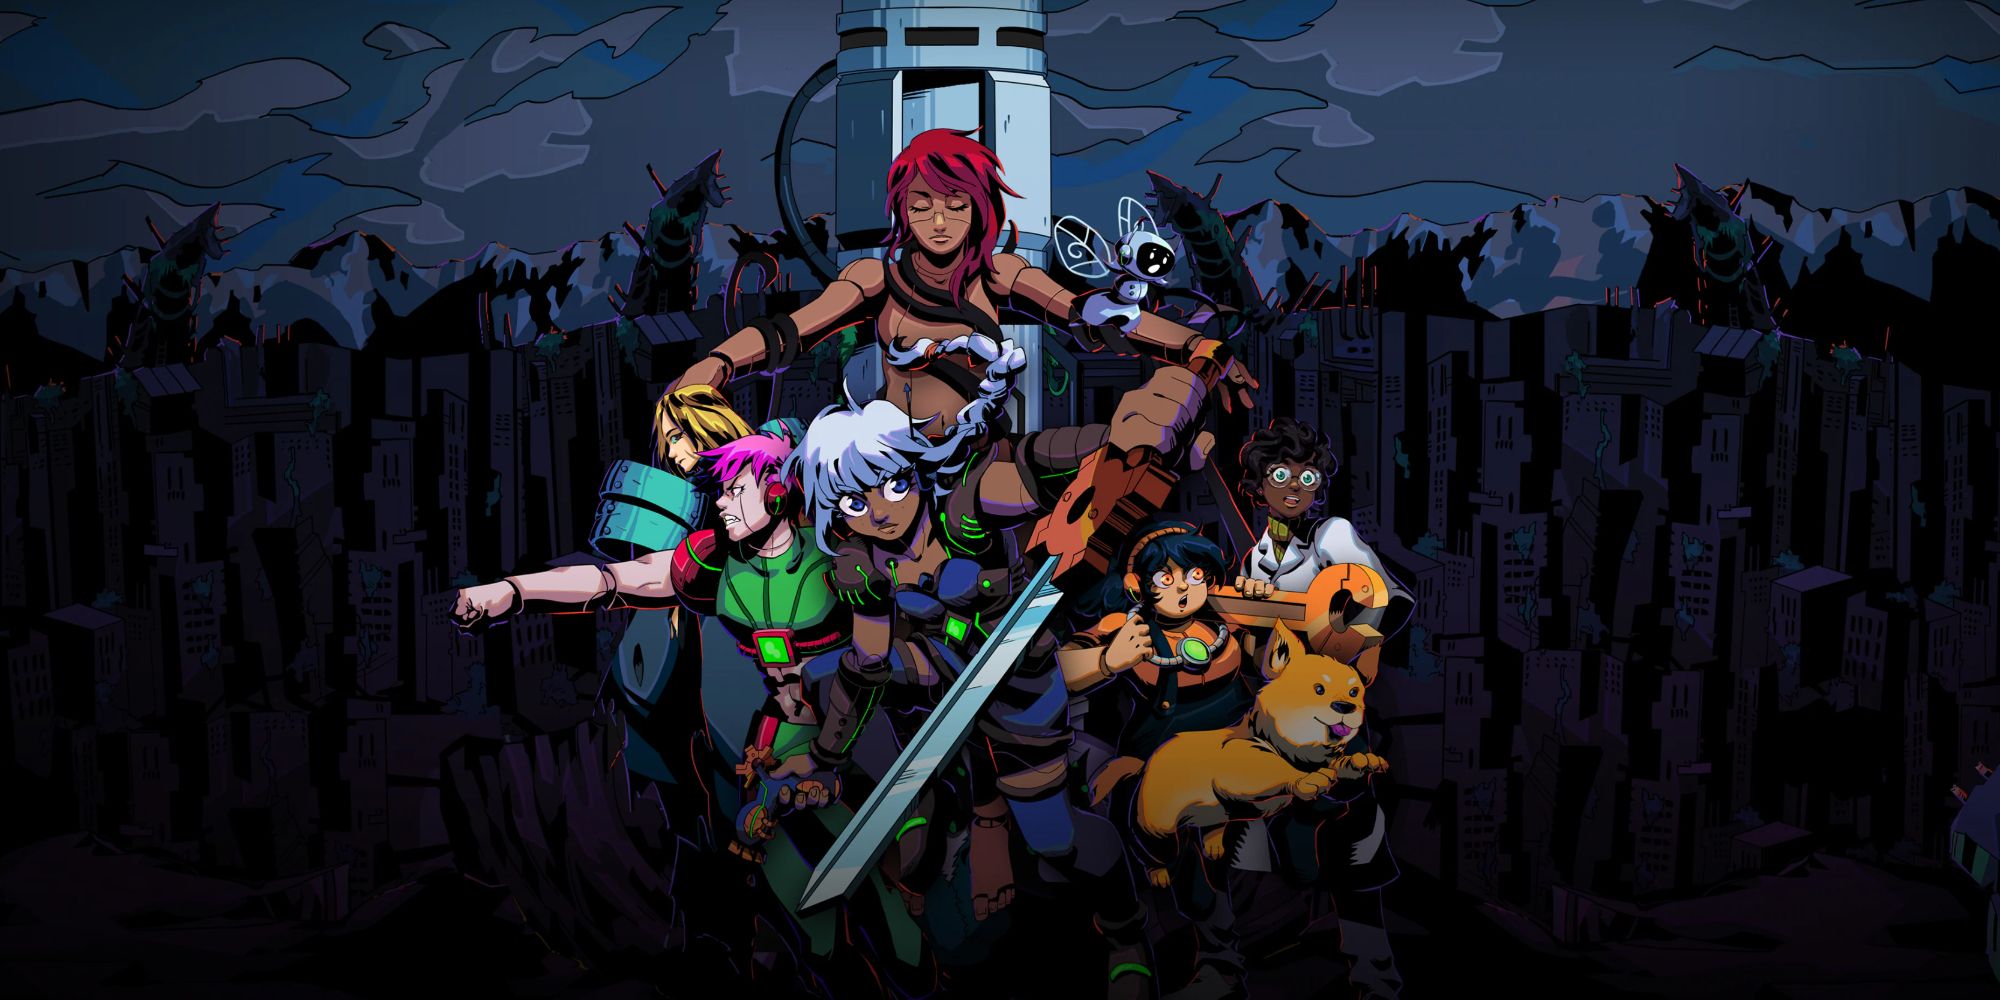 Key Art for Unsighted, showcasing the game's cast of characters.